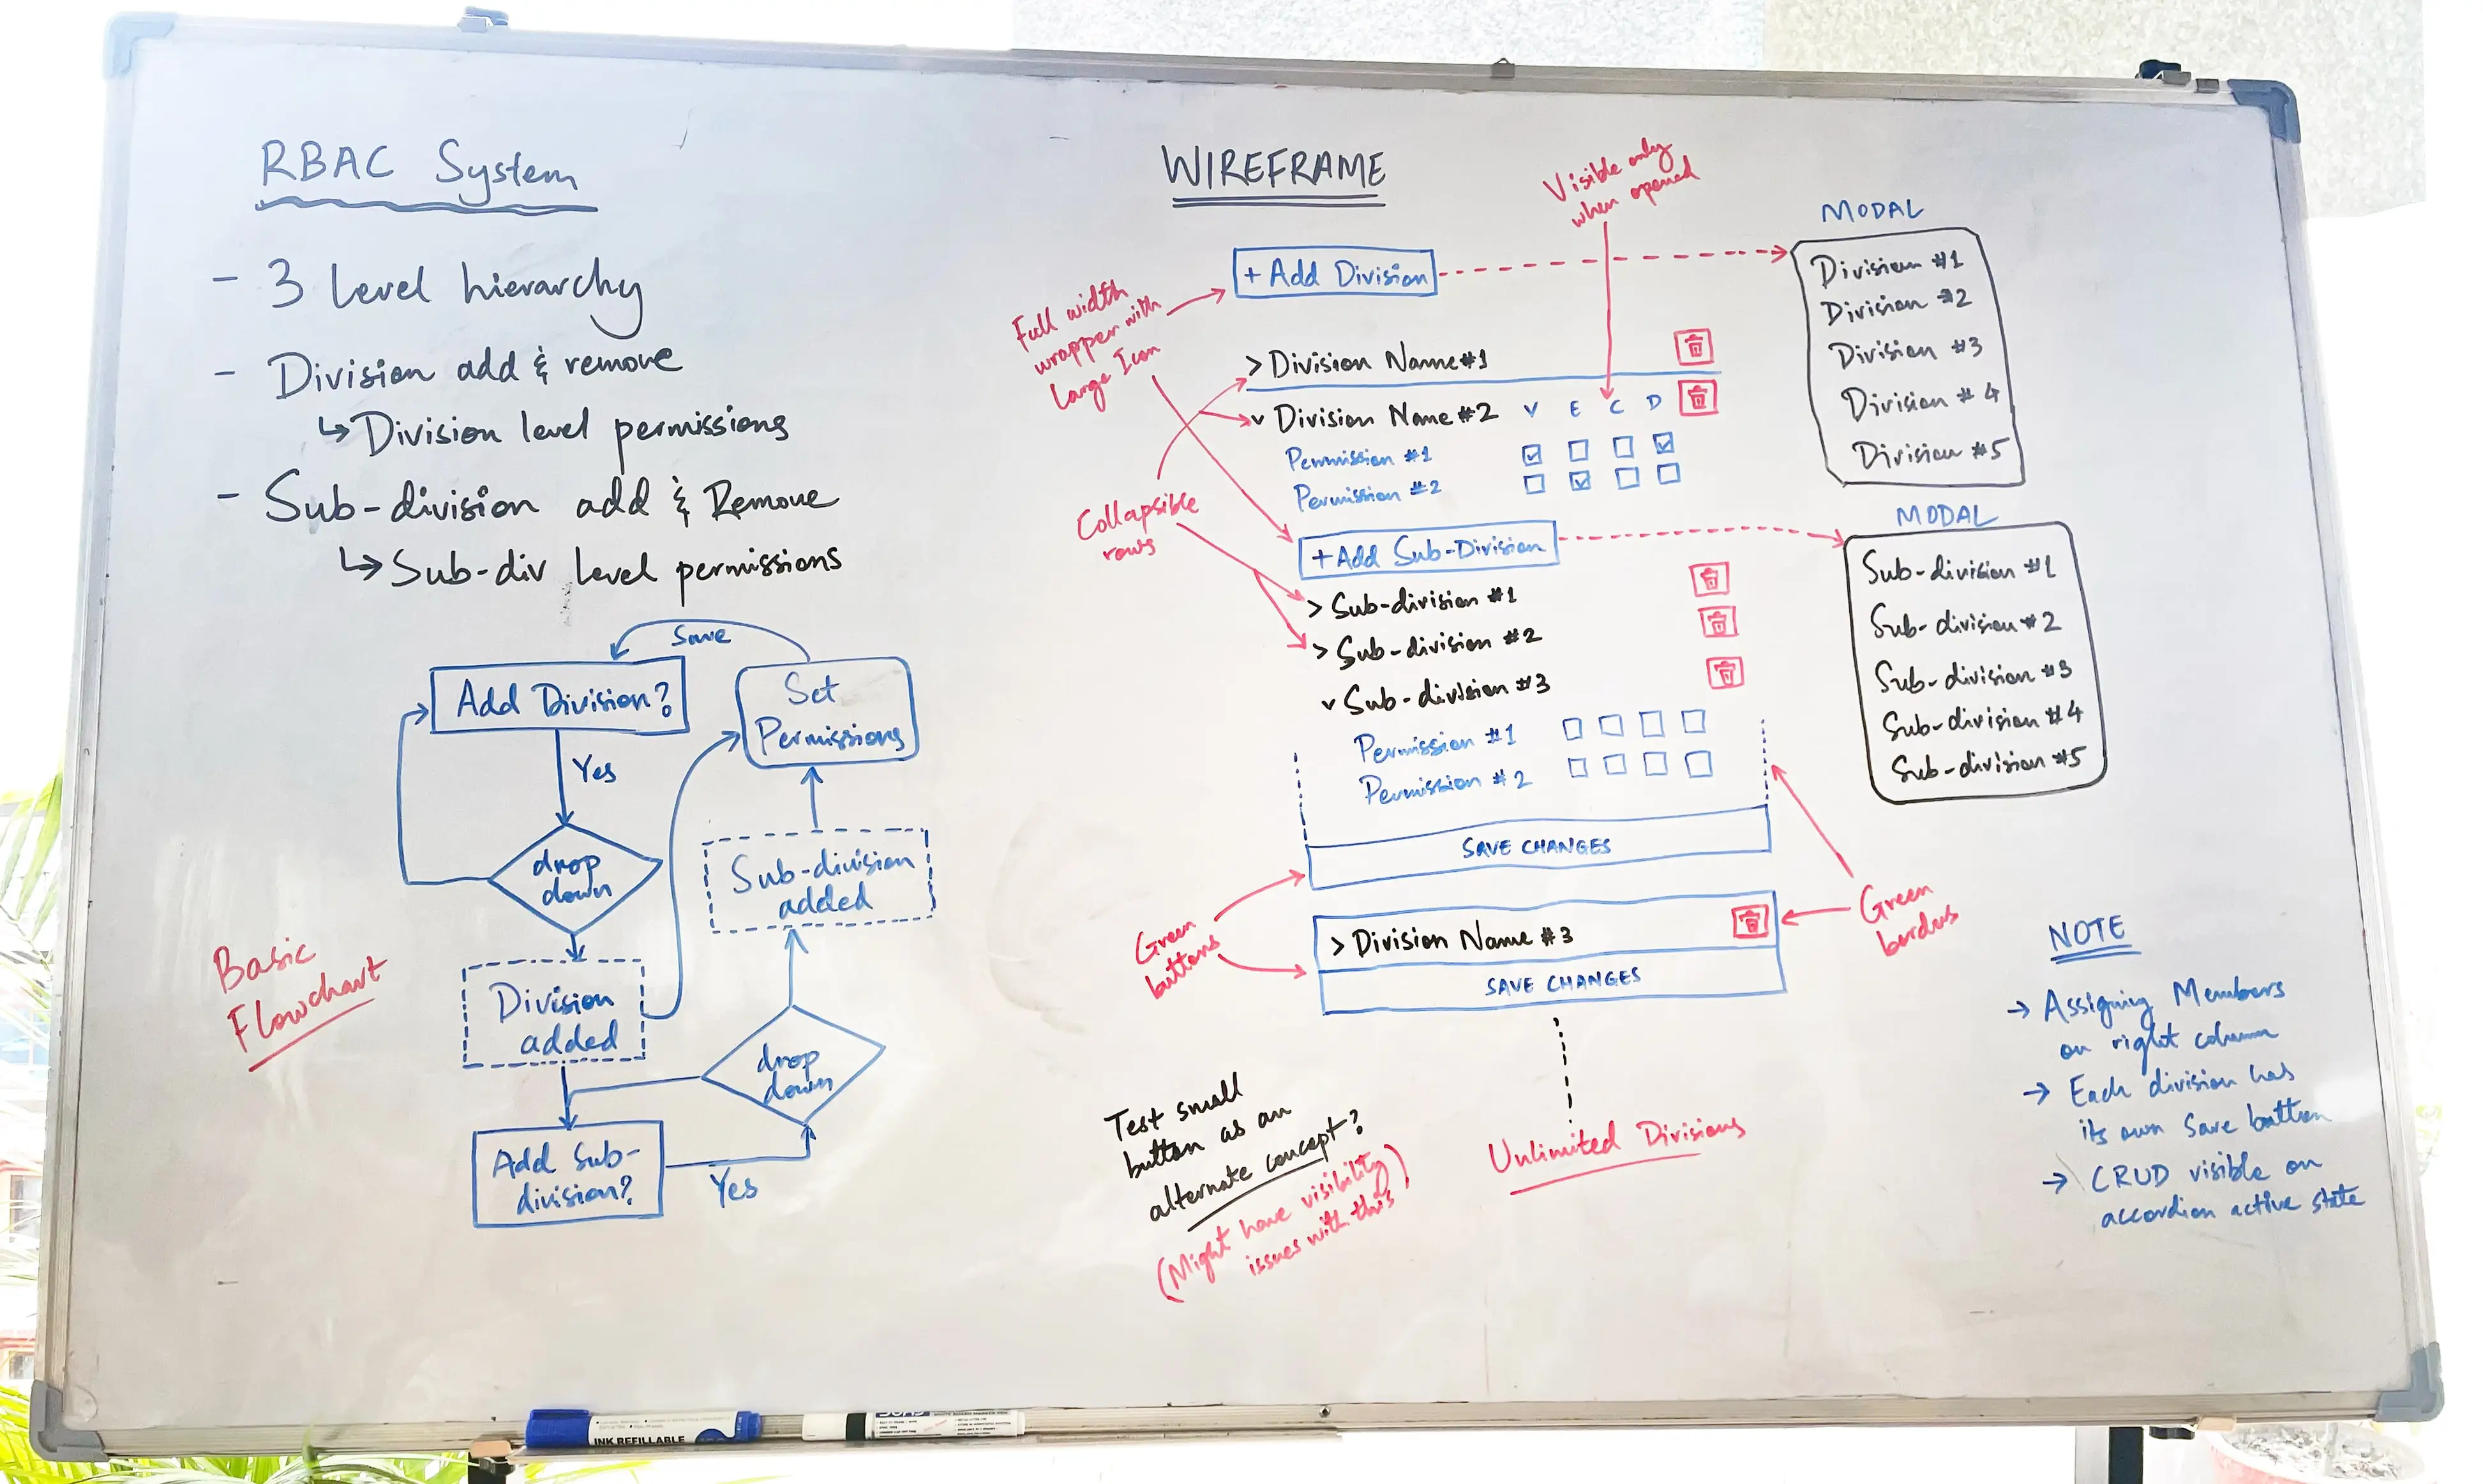 A whiteboard with brainstorming and sketches for product design